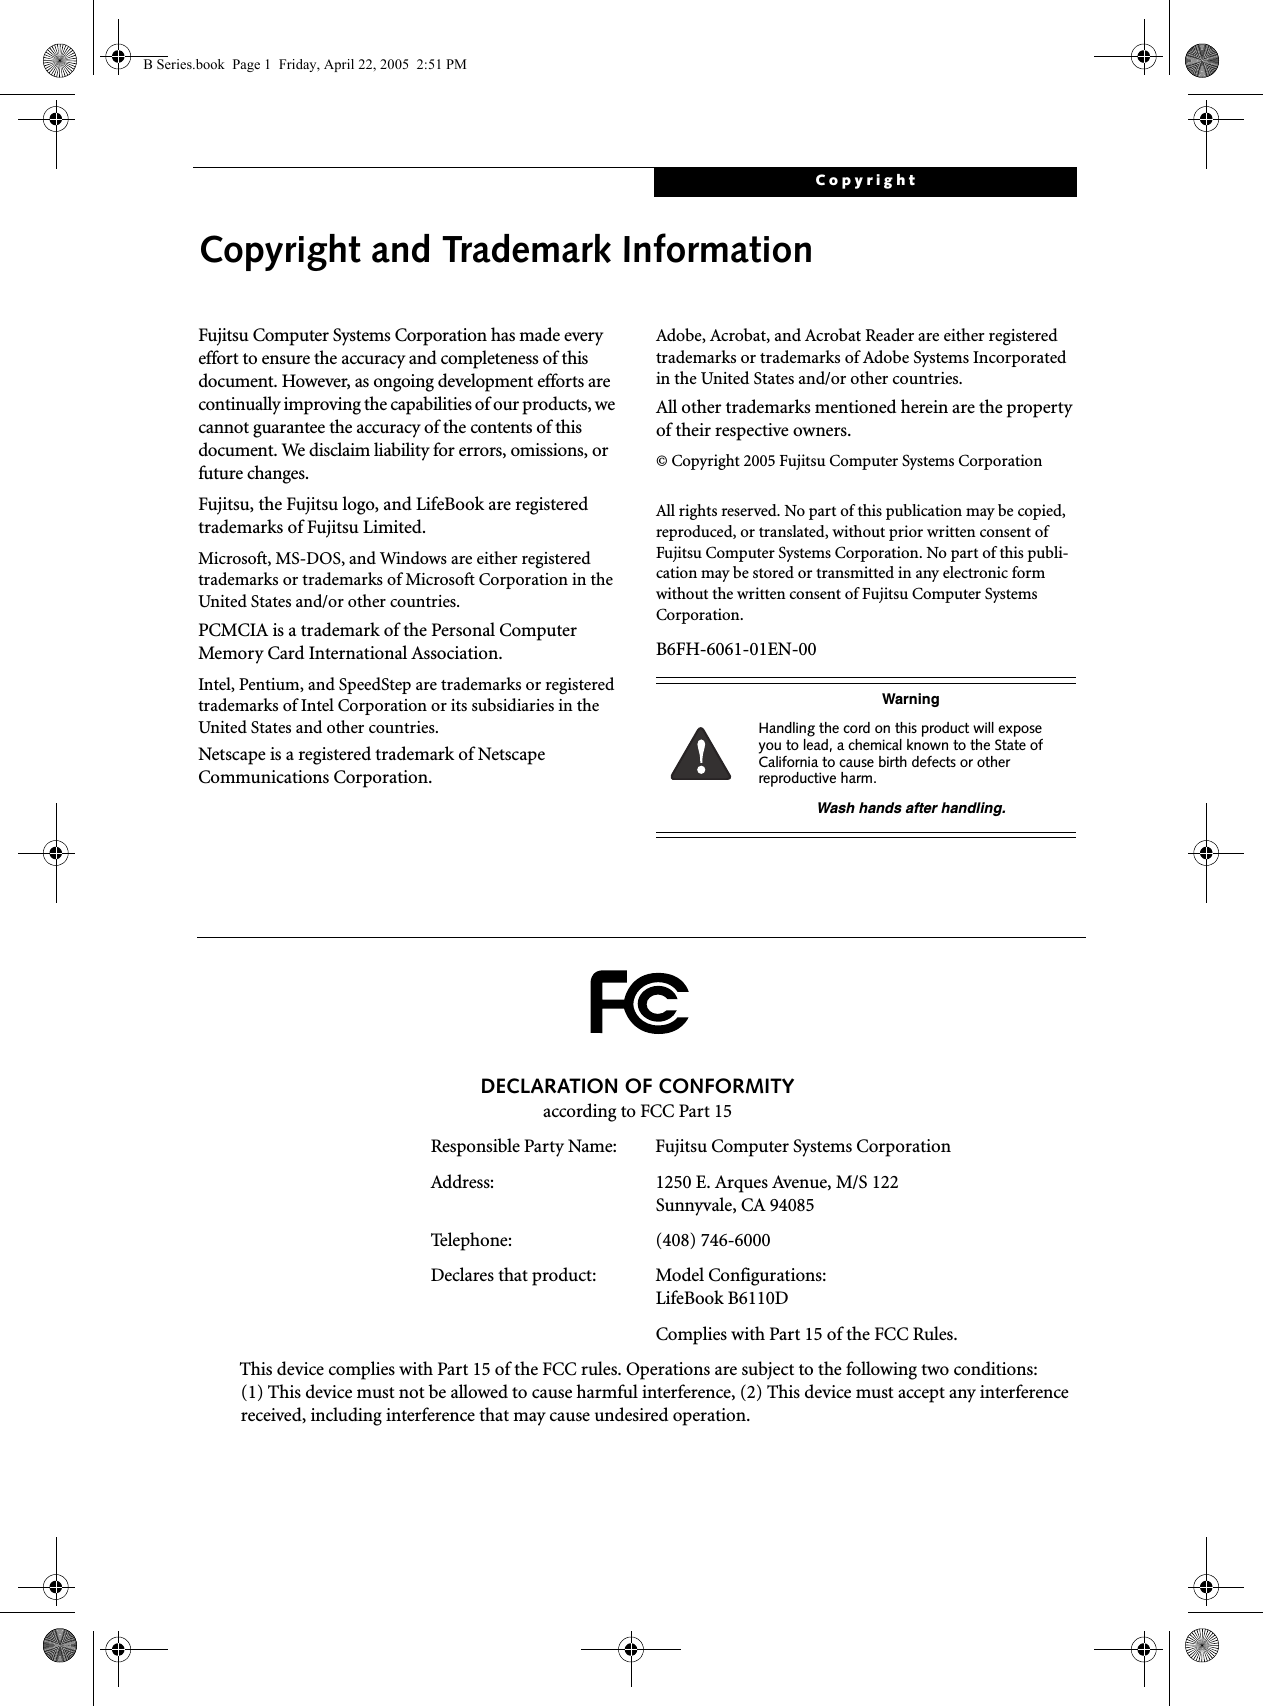 CopyrightCopyright and Trademark InformationFujitsu Computer Systems Corporation has made every effort to ensure the accuracy and completeness of this document. However, as ongoing development efforts are continually improving the capabilities of our products, we cannot guarantee the accuracy of the contents of this document. We disclaim liability for errors, omissions, or future changes.Fujitsu, the Fujitsu logo, and LifeBook are registered trademarks of Fujitsu Limited.Microsoft, MS-DOS, and Windows are either registered trademarks or trademarks of Microsoft Corporation in the United States and/or other countries.PCMCIA is a trademark of the Personal Computer Memory Card International Association.Intel, Pentium, and SpeedStep are trademarks or registered trademarks of Intel Corporation or its subsidiaries in the United States and other countries.Netscape is a registered trademark of Netscape Communications Corporation.Adobe, Acrobat, and Acrobat Reader are either registered trademarks or trademarks of Adobe Systems Incorporated in the United States and/or other countries.All other trademarks mentioned herein are the property of their respective owners.© Copyright 2005 Fujitsu Computer Systems CorporationAll rights reserved. No part of this publication may be copied, reproduced, or translated, without prior written consent of Fujitsu Computer Systems Corporation. No part of this publi-cation may be stored or transmitted in any electronic form without the written consent of Fujitsu Computer Systems Corporation.B6FH-6061-01EN-00WarningHandling the cord on this product will expose you to lead, a chemical known to the State of California to cause birth defects or other reproductive harm. Wash hands after handling.DECLARATION OF CONFORMITYaccording to FCC Part 15Responsible Party Name: Fujitsu Computer Systems CorporationAddress:  1250 E. Arques Avenue, M/S 122Sunnyvale, CA 94085Telephone: (408) 746-6000Declares that product: Model Configurations:LifeBook B6110D  Complies with Part 15 of the FCC Rules.This device complies with Part 15 of the FCC rules. Operations are subject to the following two conditions:(1) This device must not be allowed to cause harmful interference, (2) This device must accept any interference received, including interference that may cause undesired operation.B Series.book  Page 1  Friday, April 22, 2005  2:51 PM